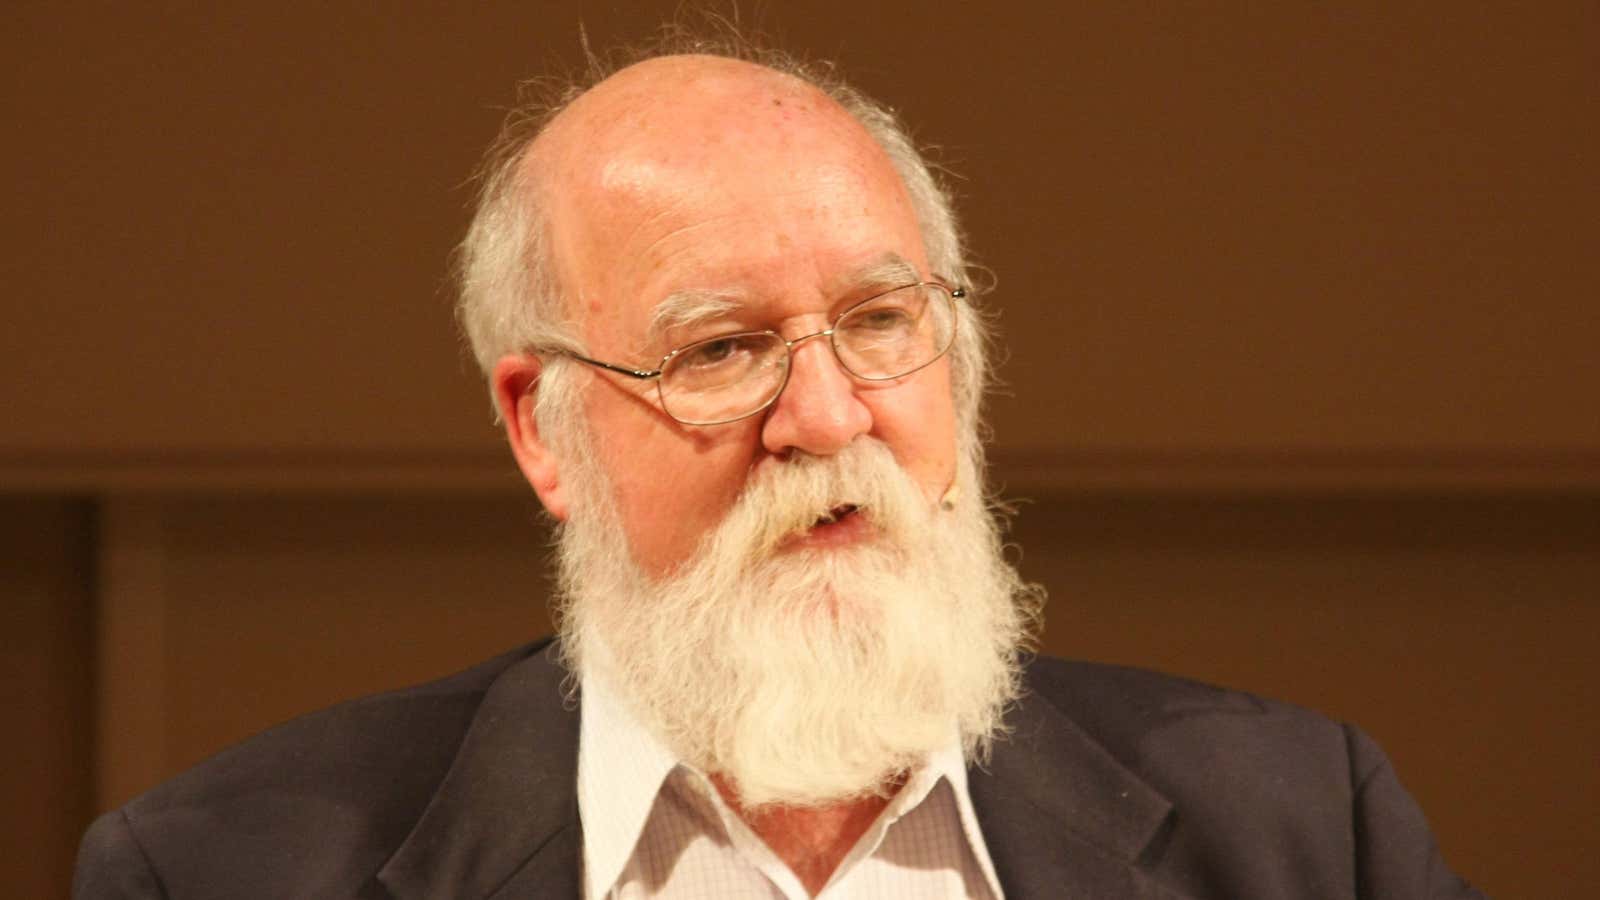 Philosopher Daniel Dennett says much of philosophy is a “luxury decoration on society.”